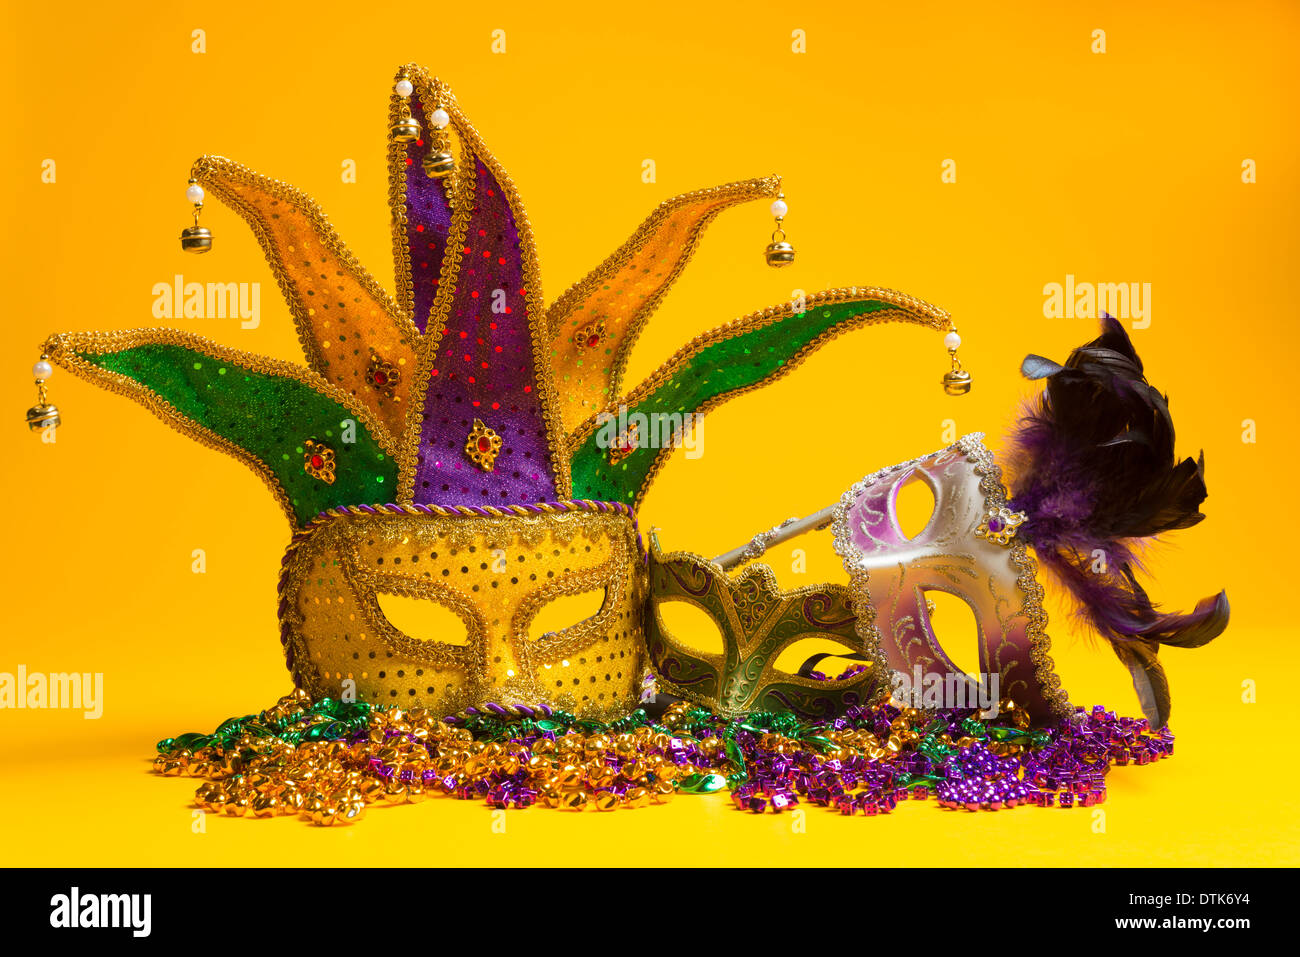 A festive, colorful group of mardi gras or carnivale masks on a yellow background. Venetian masks. Stock Photo